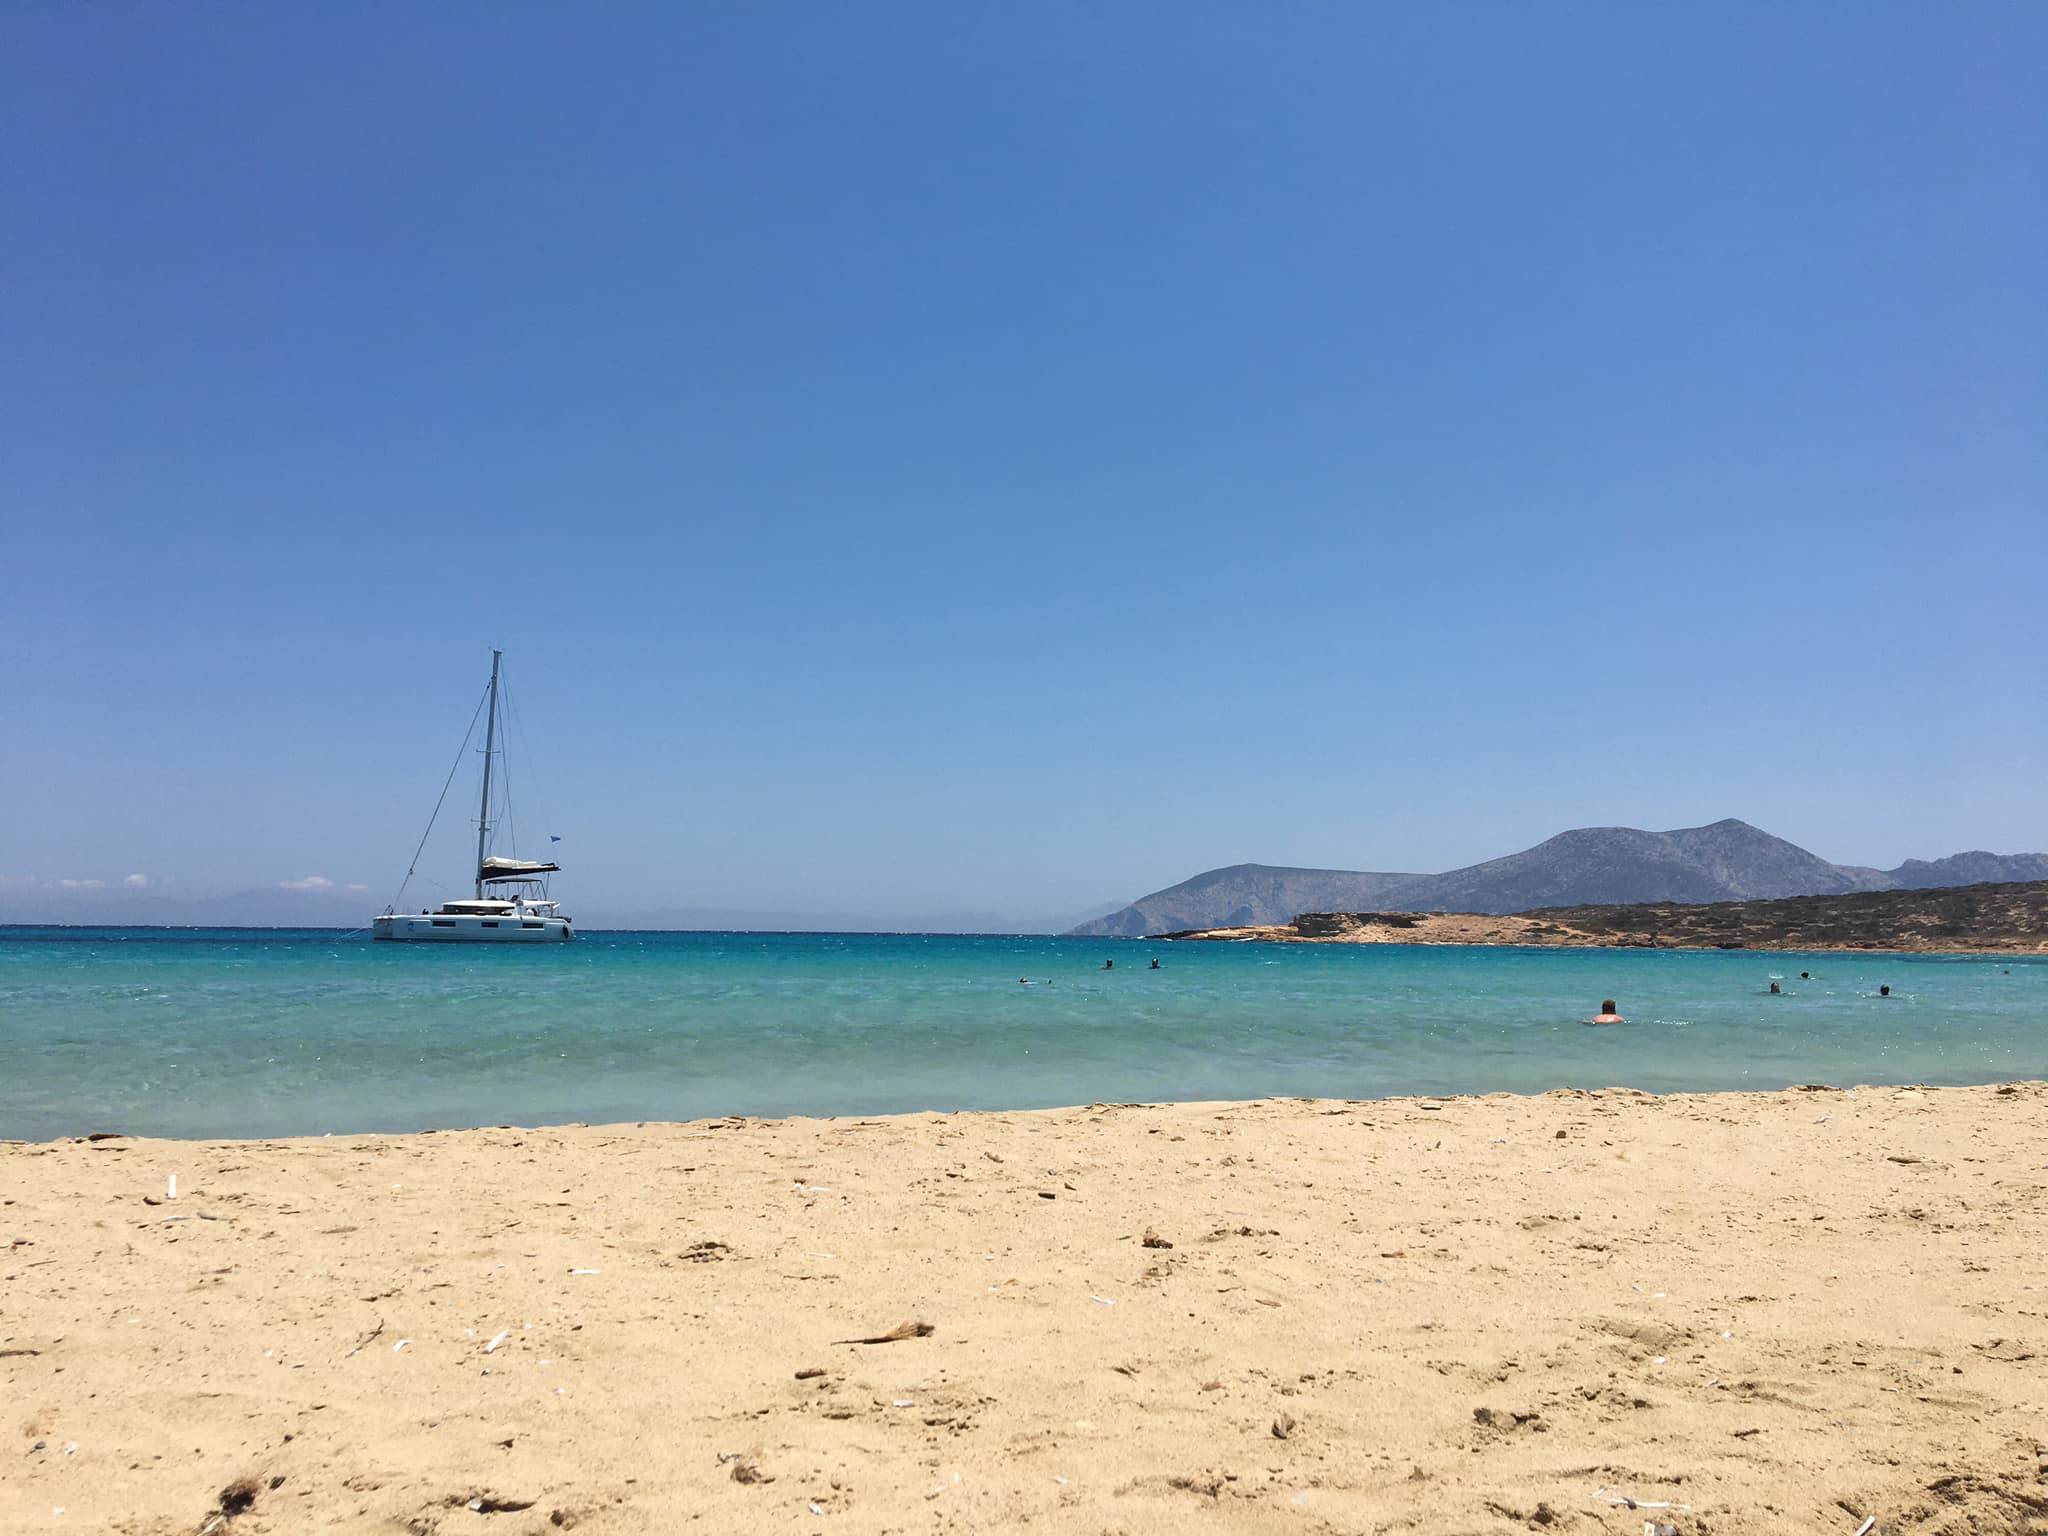 A serene beach scene on Koufinisi island featuring a catamaran yacht anchored in a clear blue bay with a sandy beach in the foreground. The background displays hilly landscapes under a bright, cloudless sky, and several people are swimming in the calm sea.






